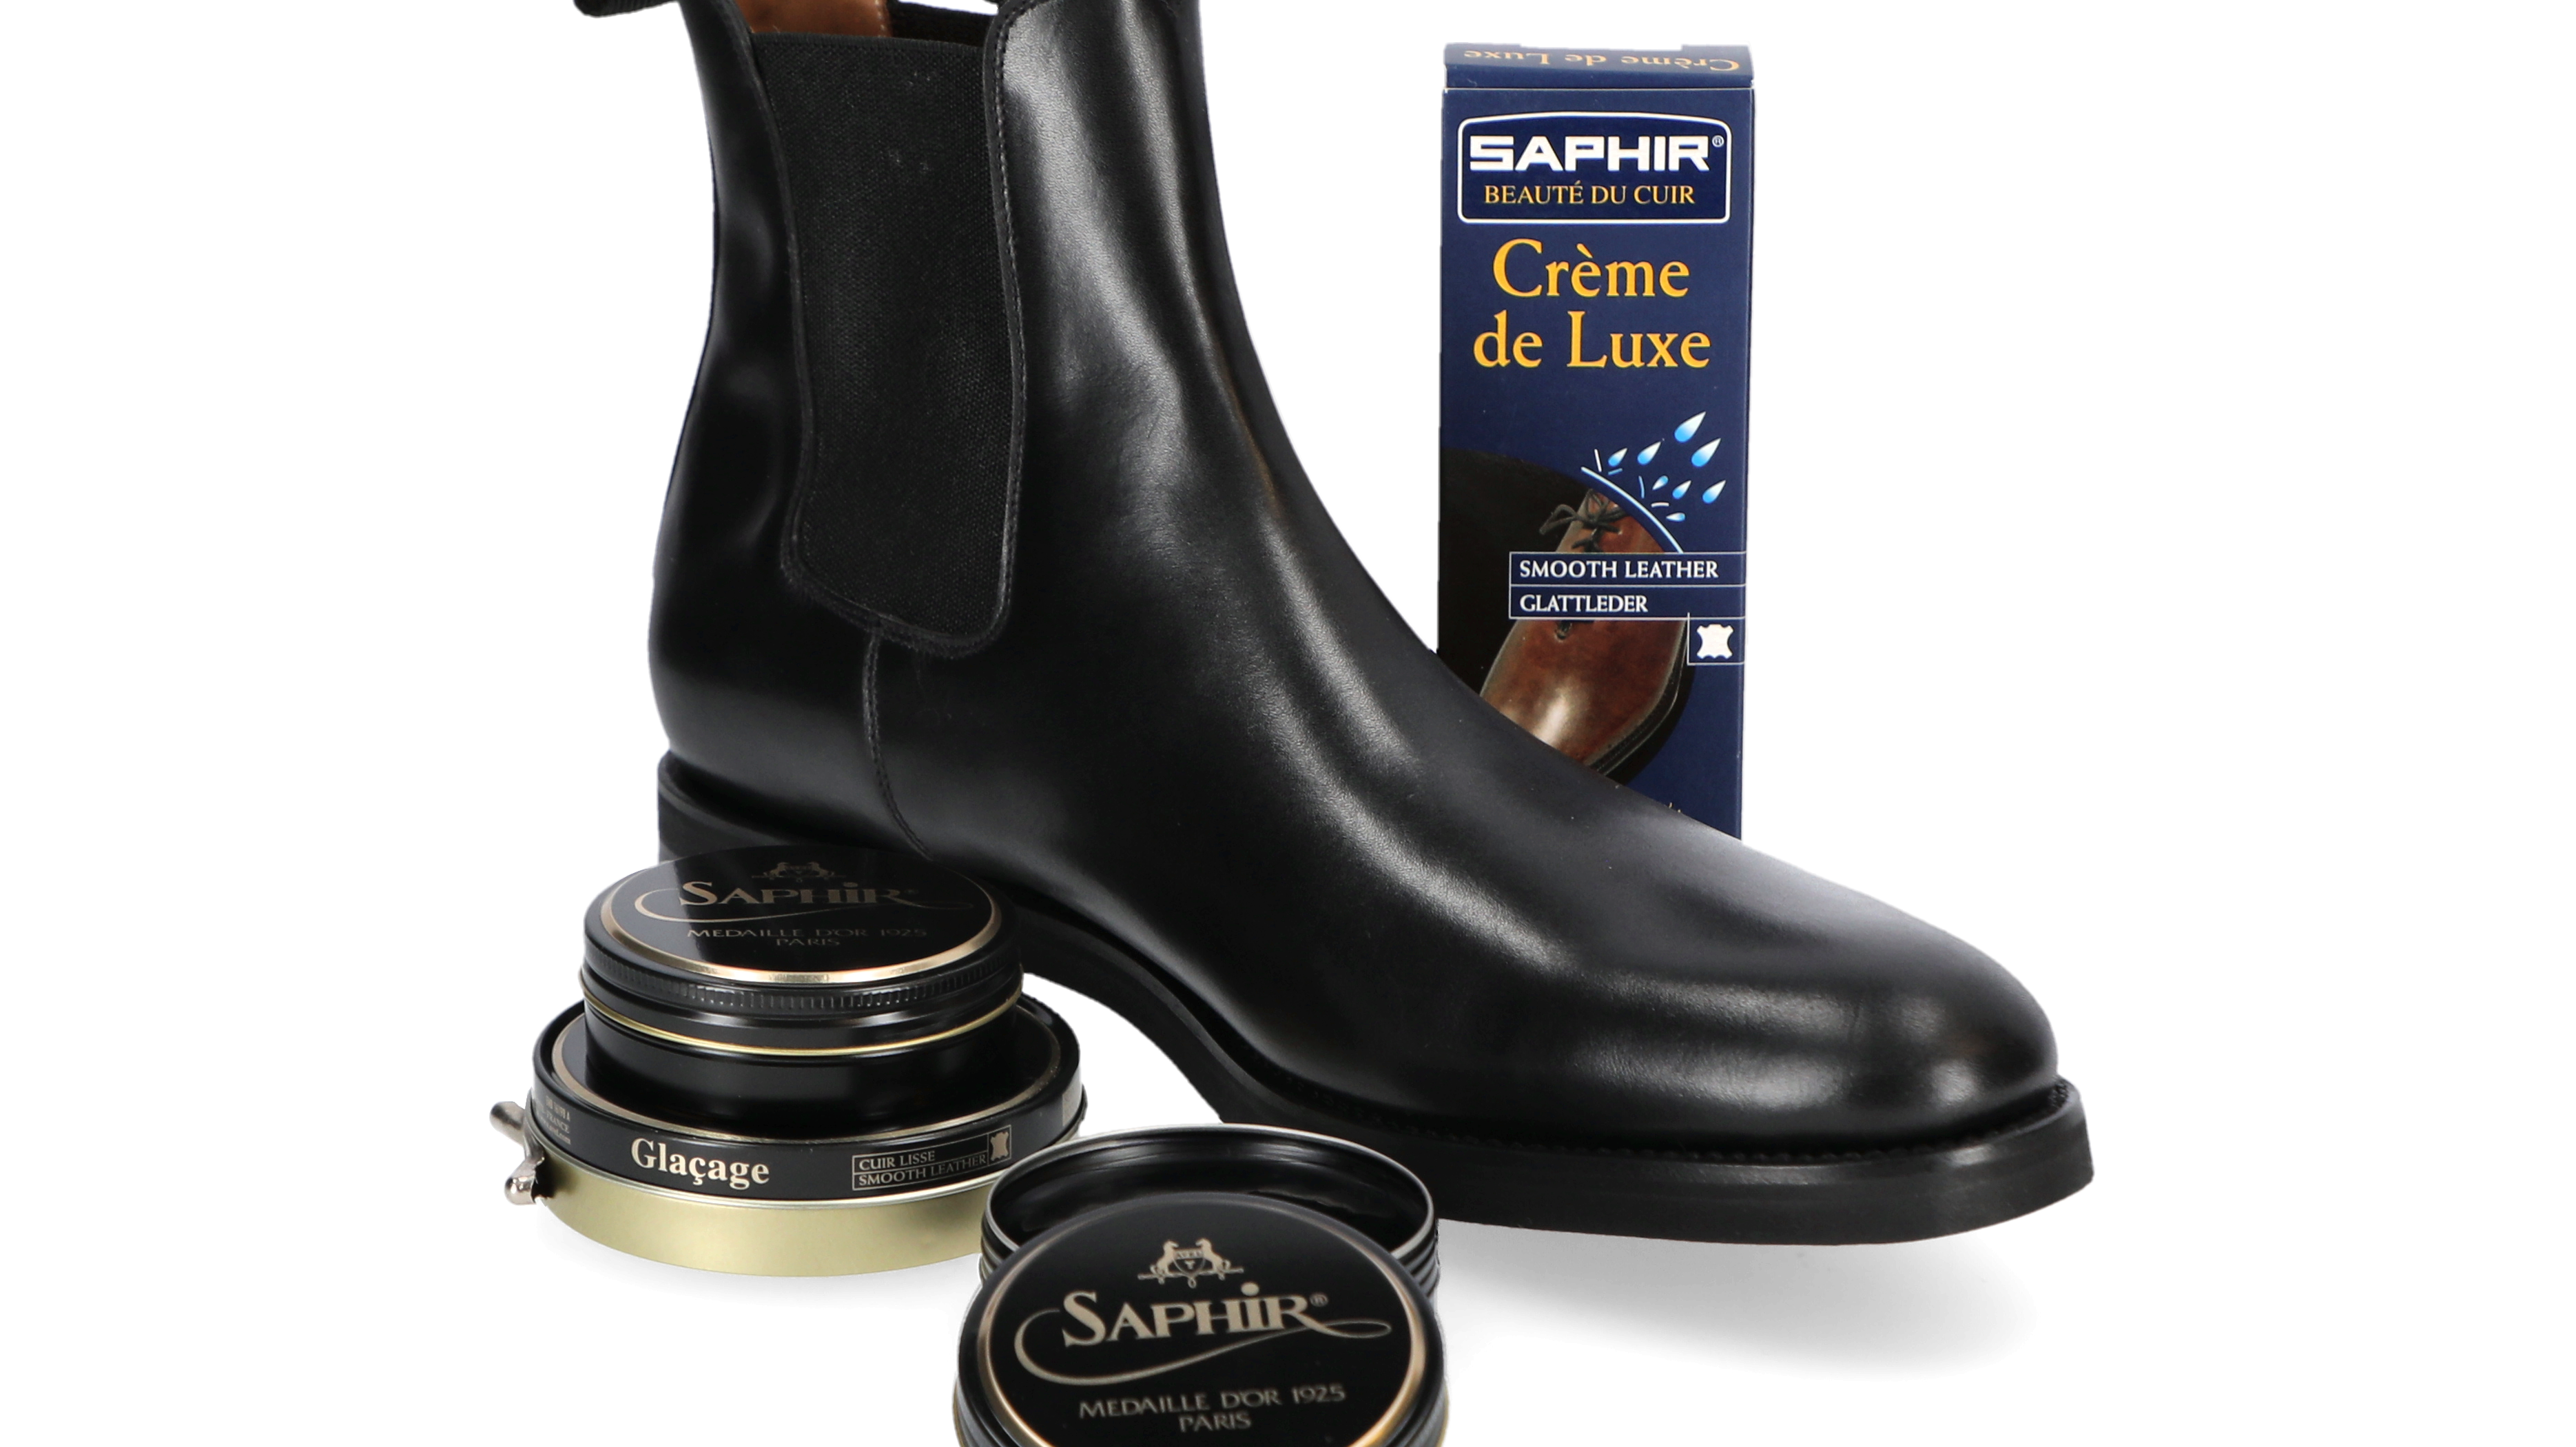 Hartt Carleton boot with saphir shoe care products